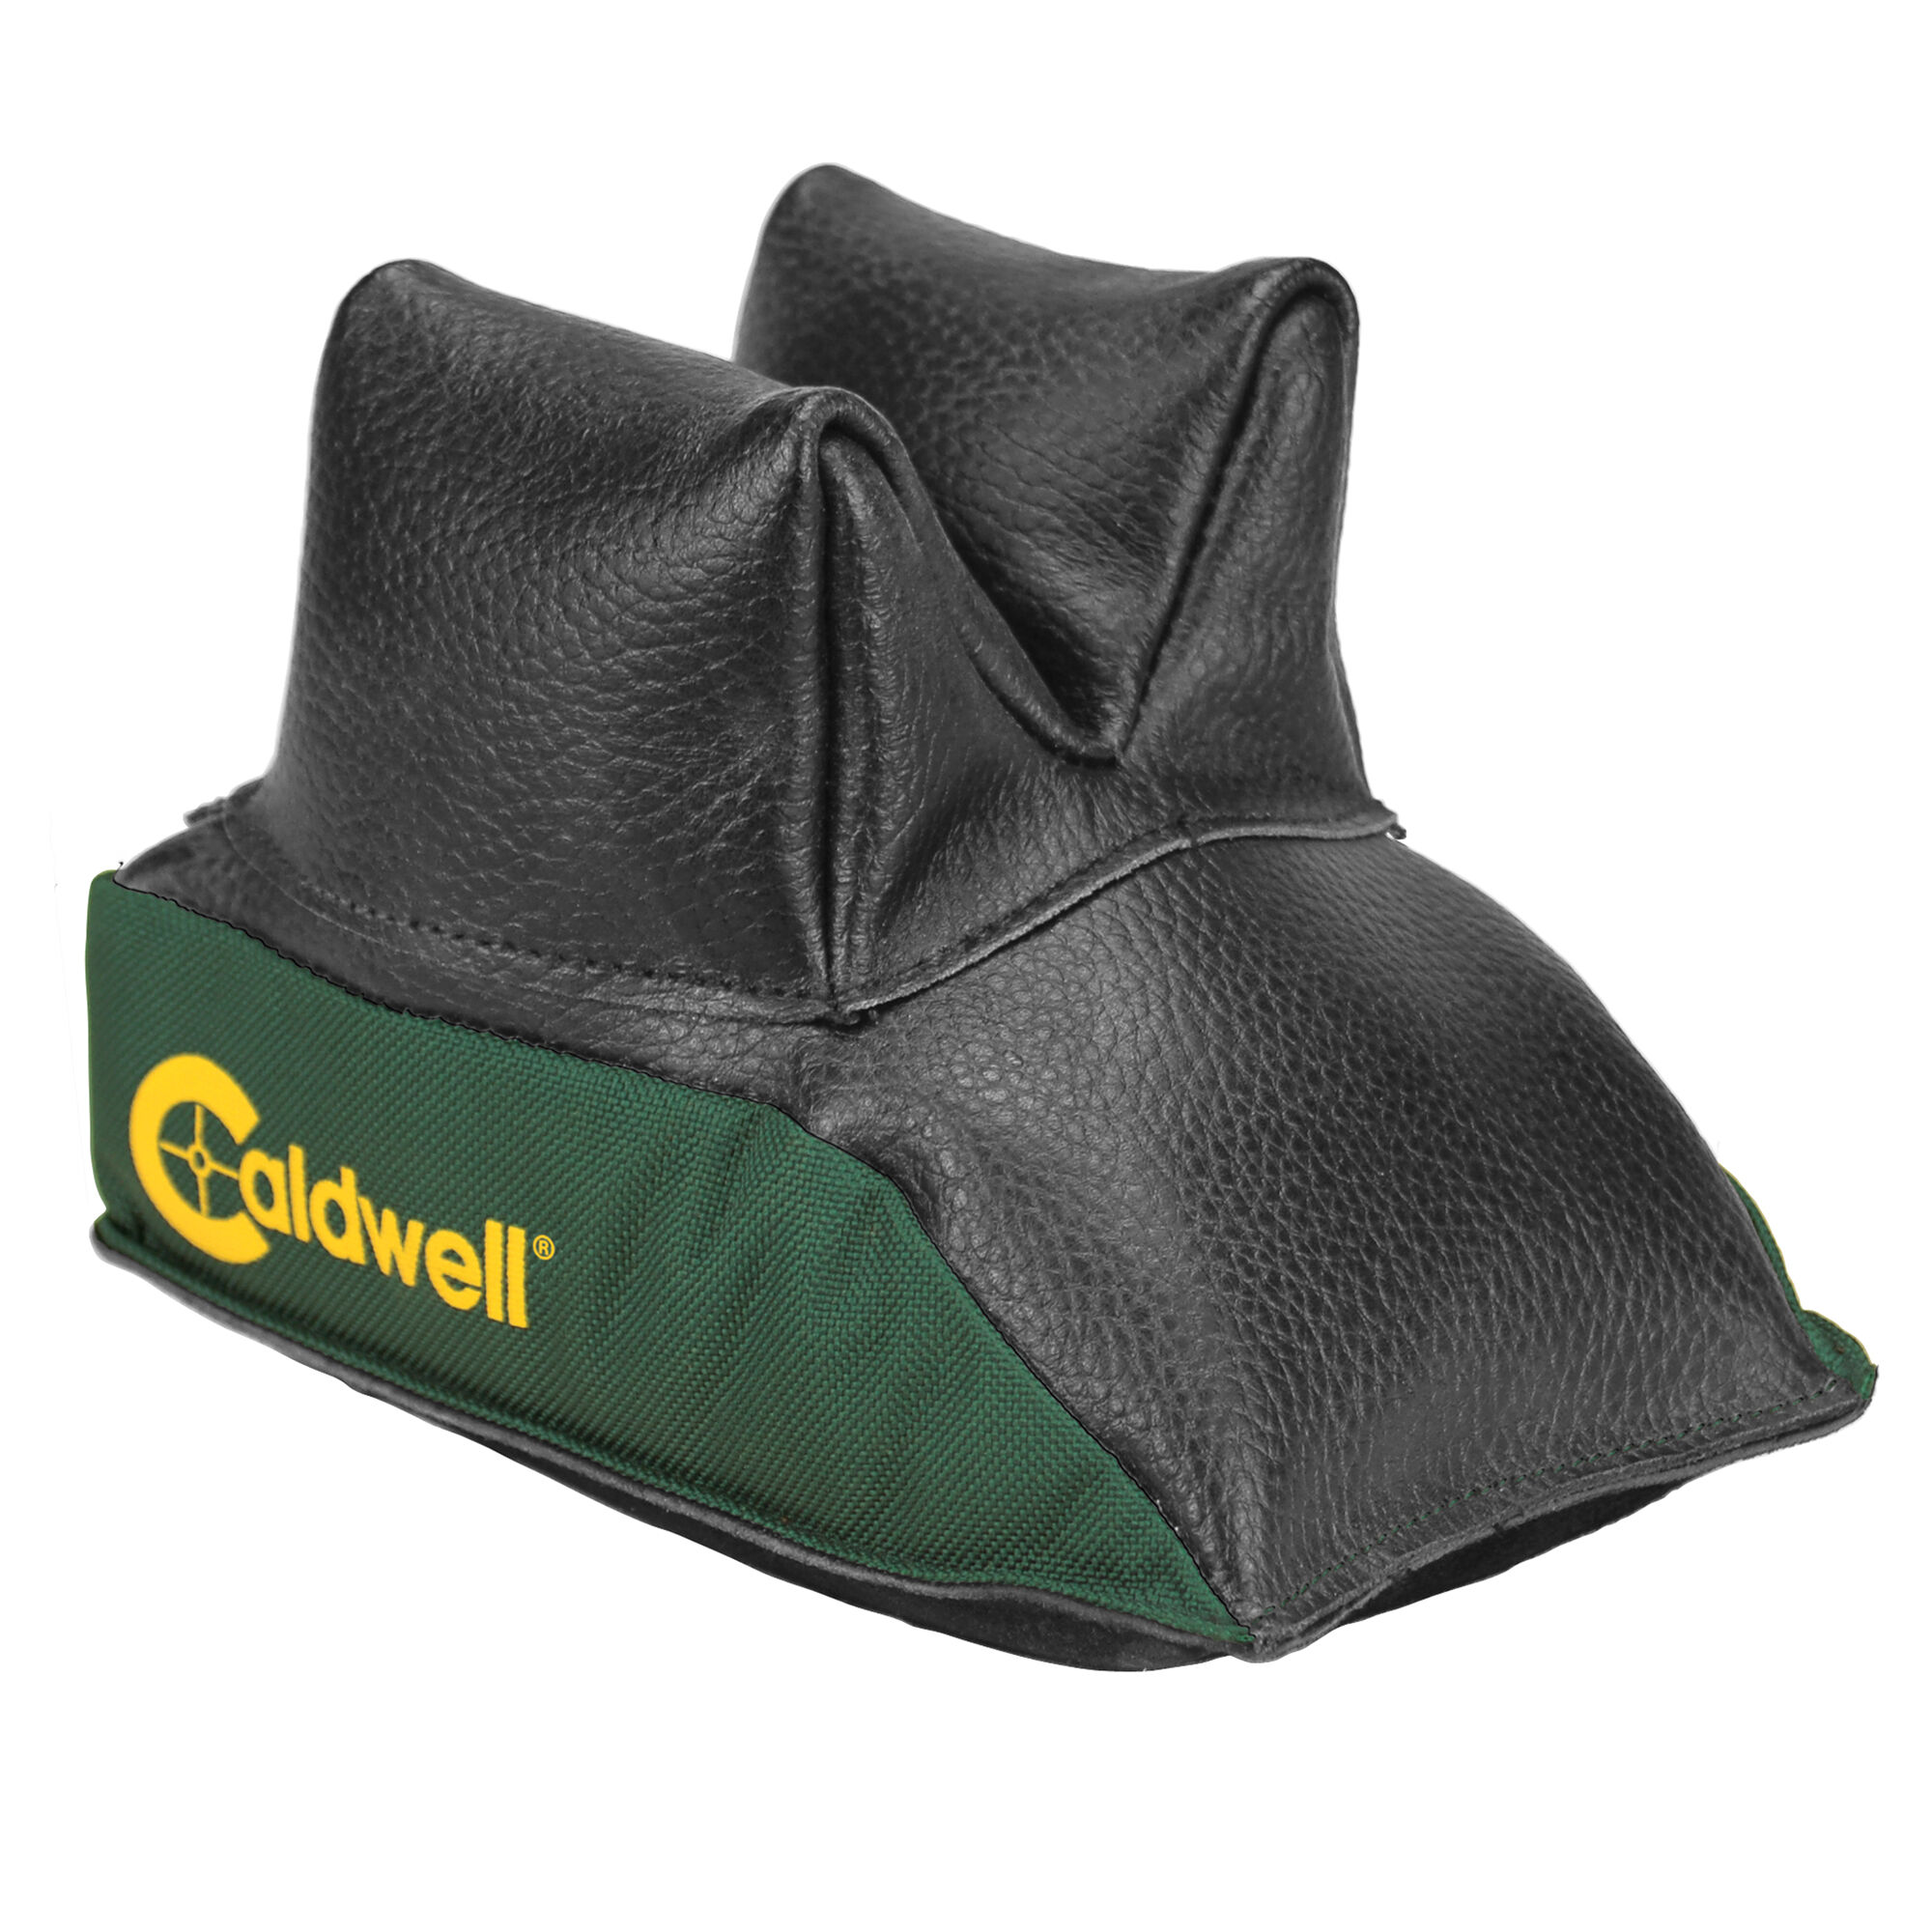 Caldwell Unfilled Rear support Bag target shooting leather universal rest 